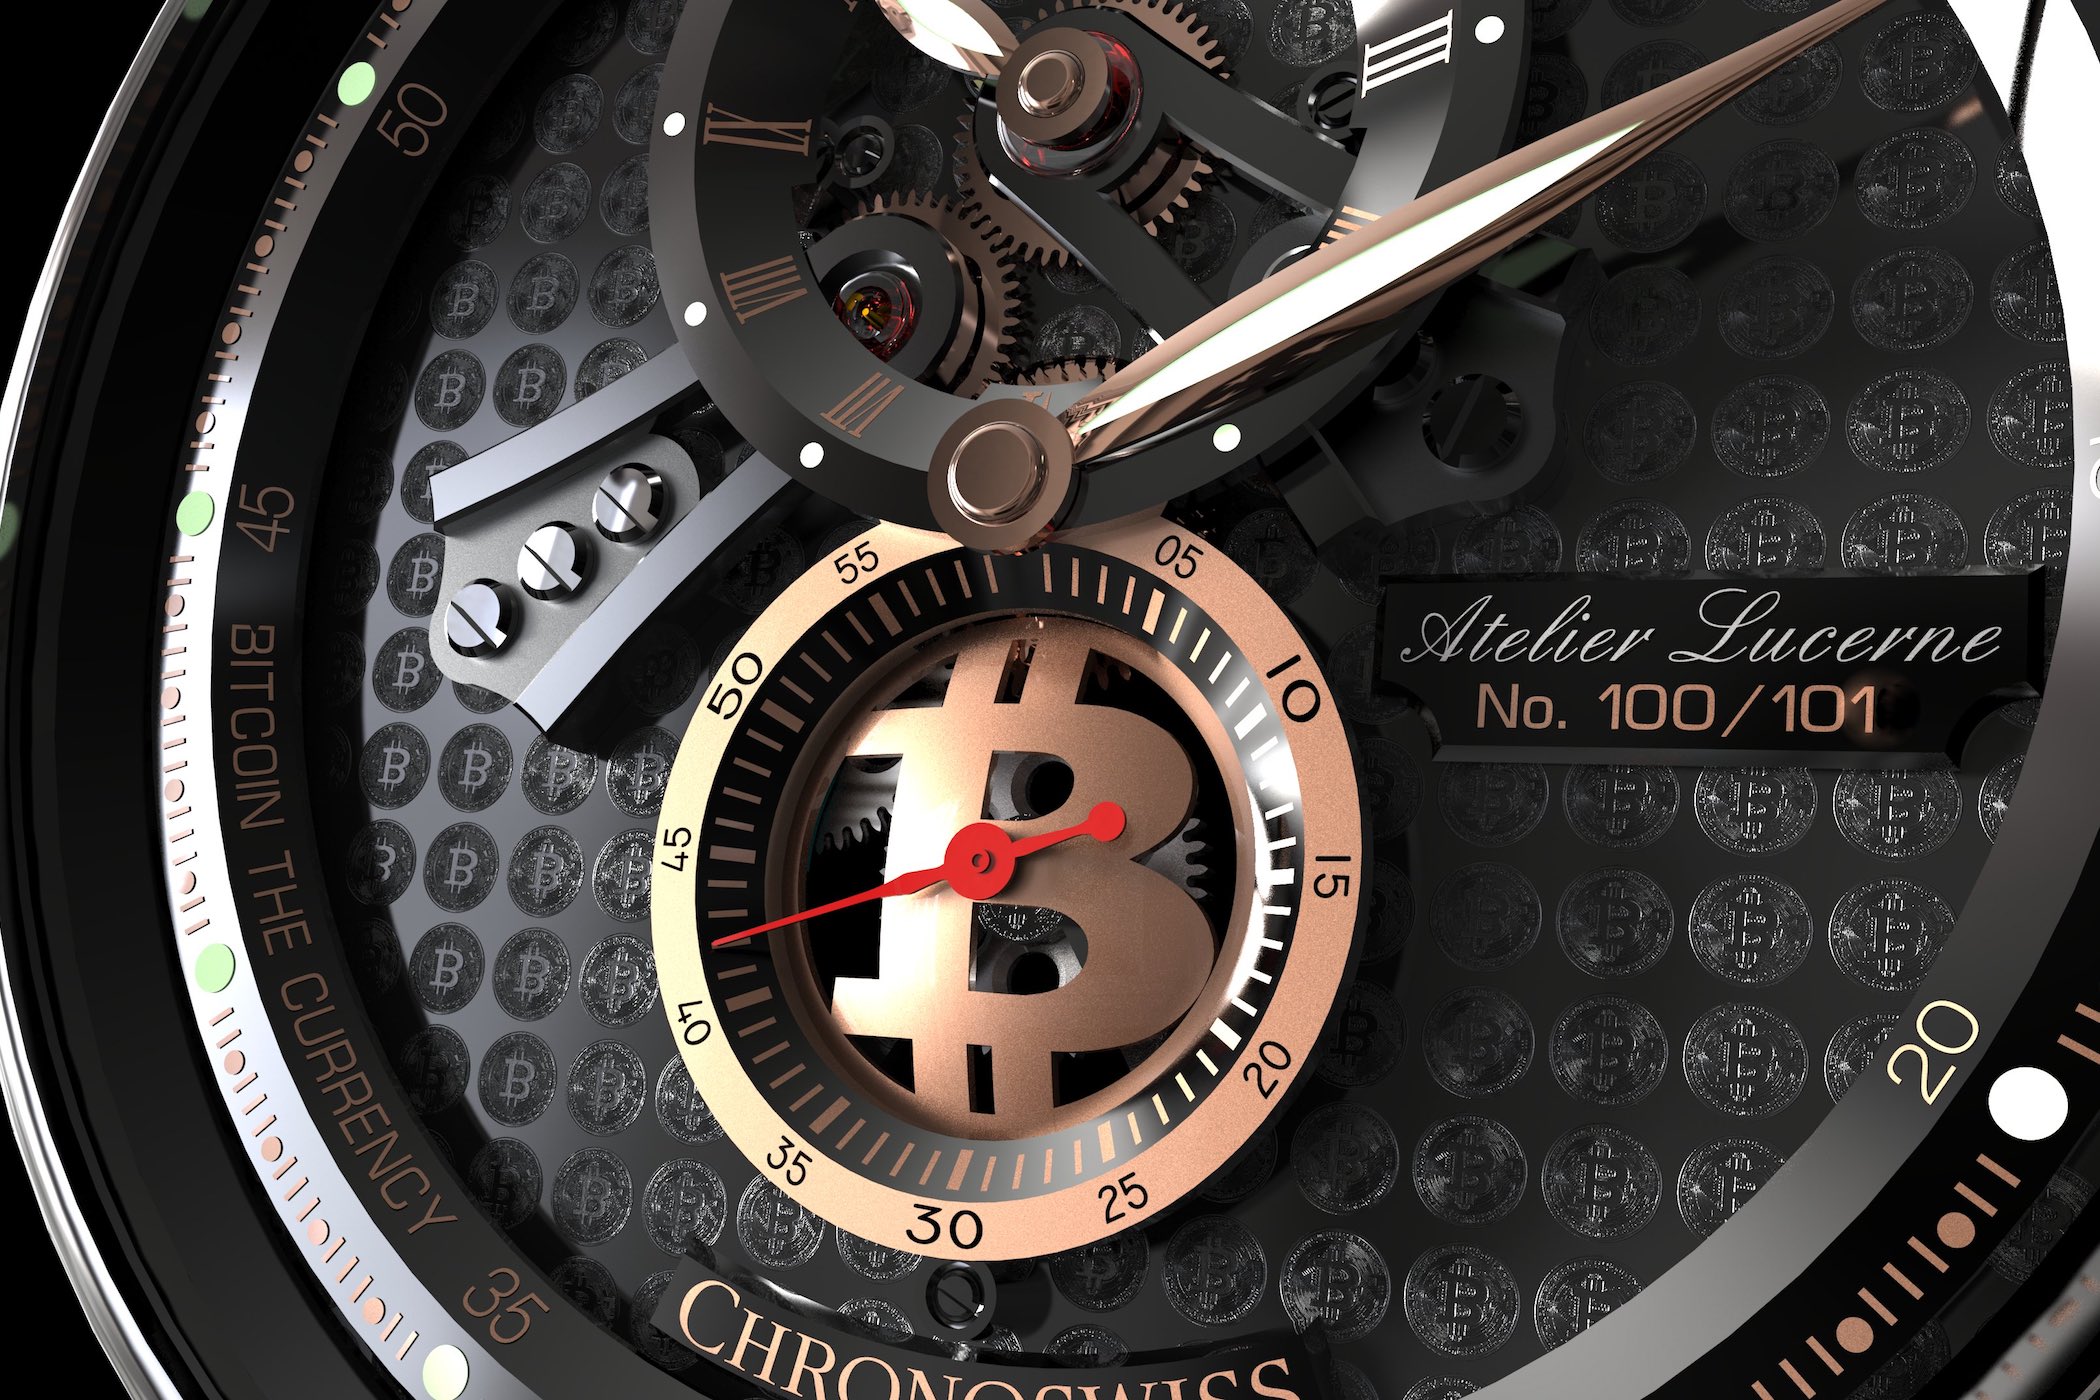 Buy Watches & Jewellery with Crypto | Rolex, Omega & Breitling with Bitcoin, Ethereum & More